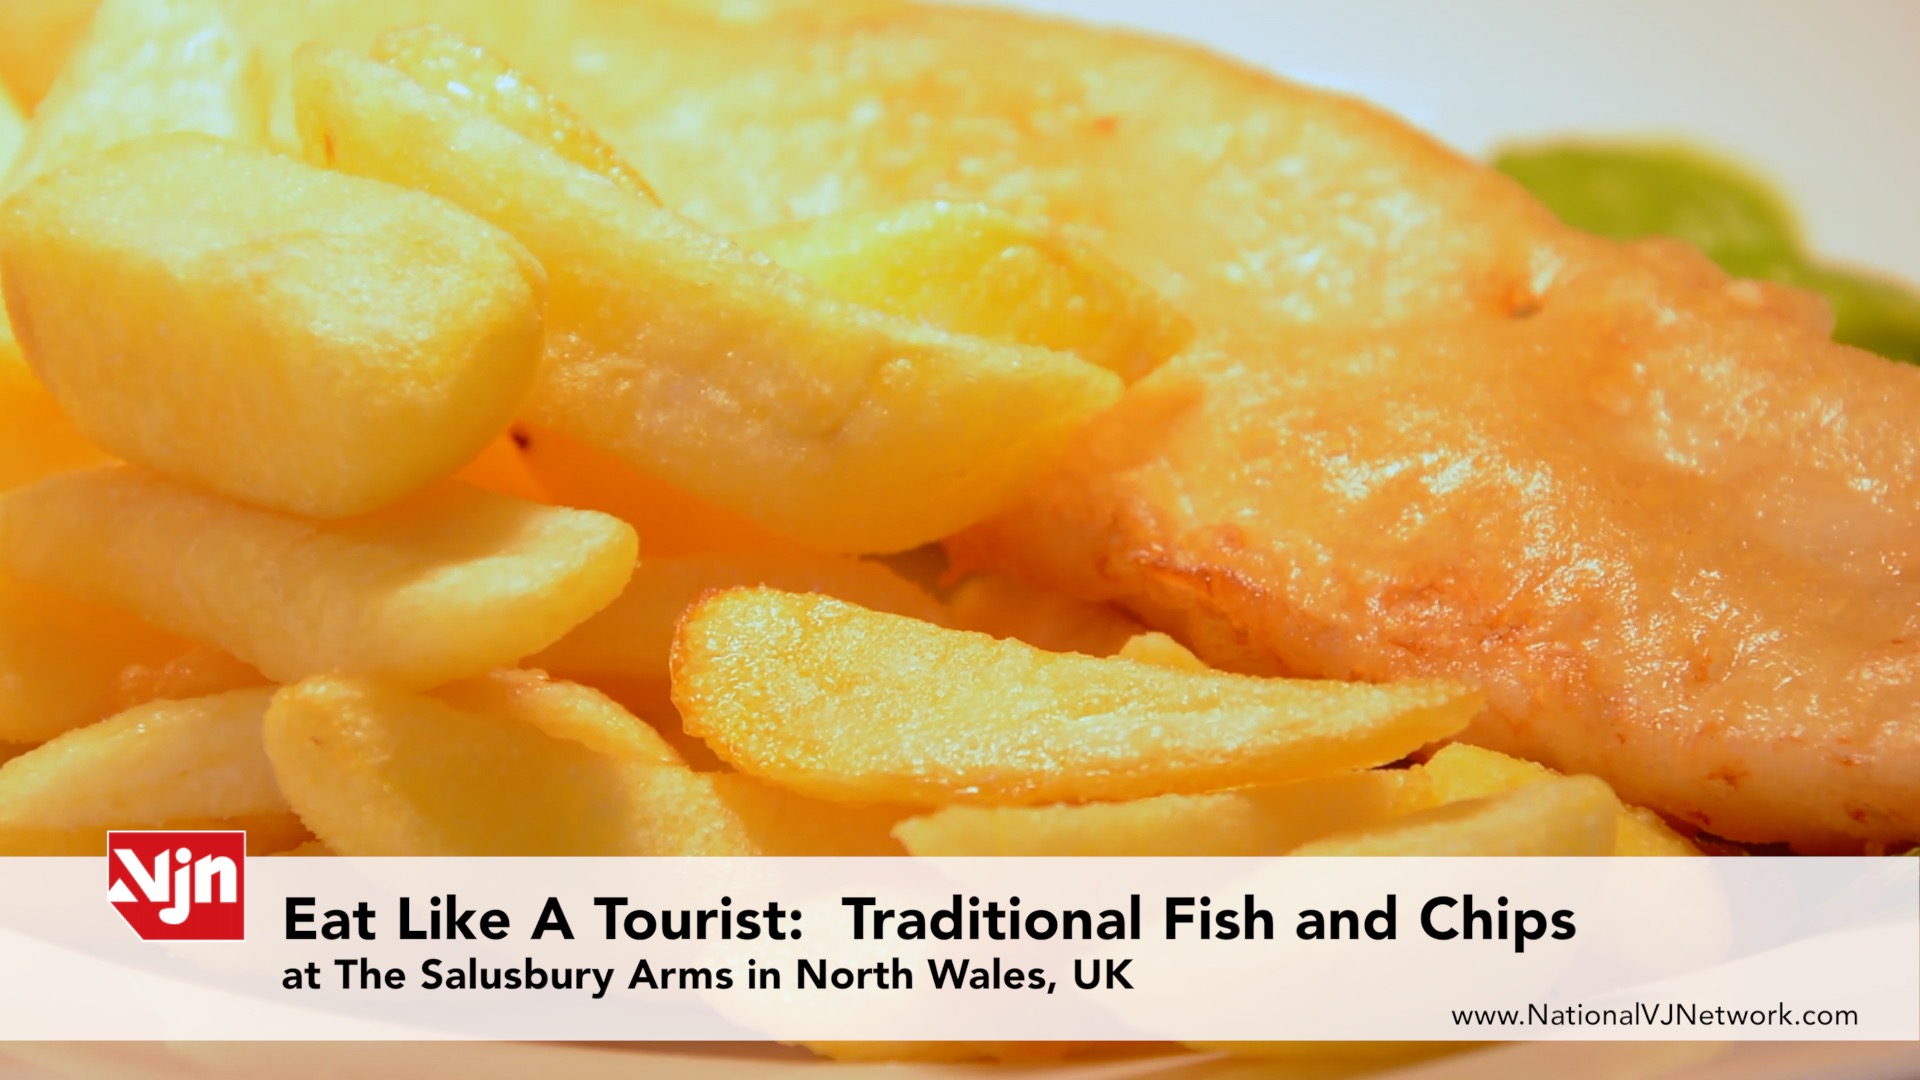 Eat Like A Tourist: How to Make Traditional Fish and Chips - North Wales, U.K.